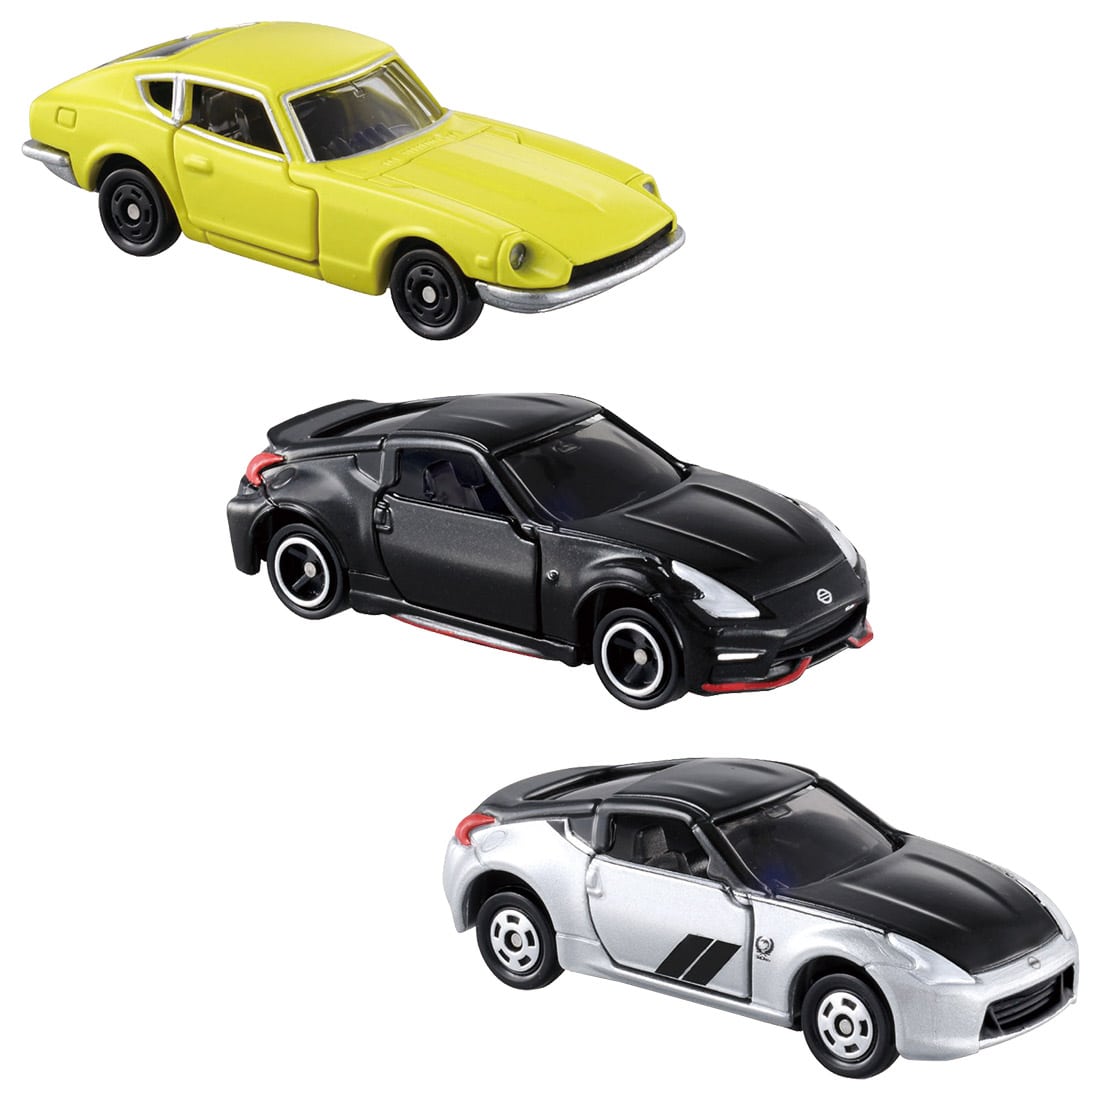 Takara Tomy Mall Original Tomica "Fairlady Z 50th Anniversary Collection"